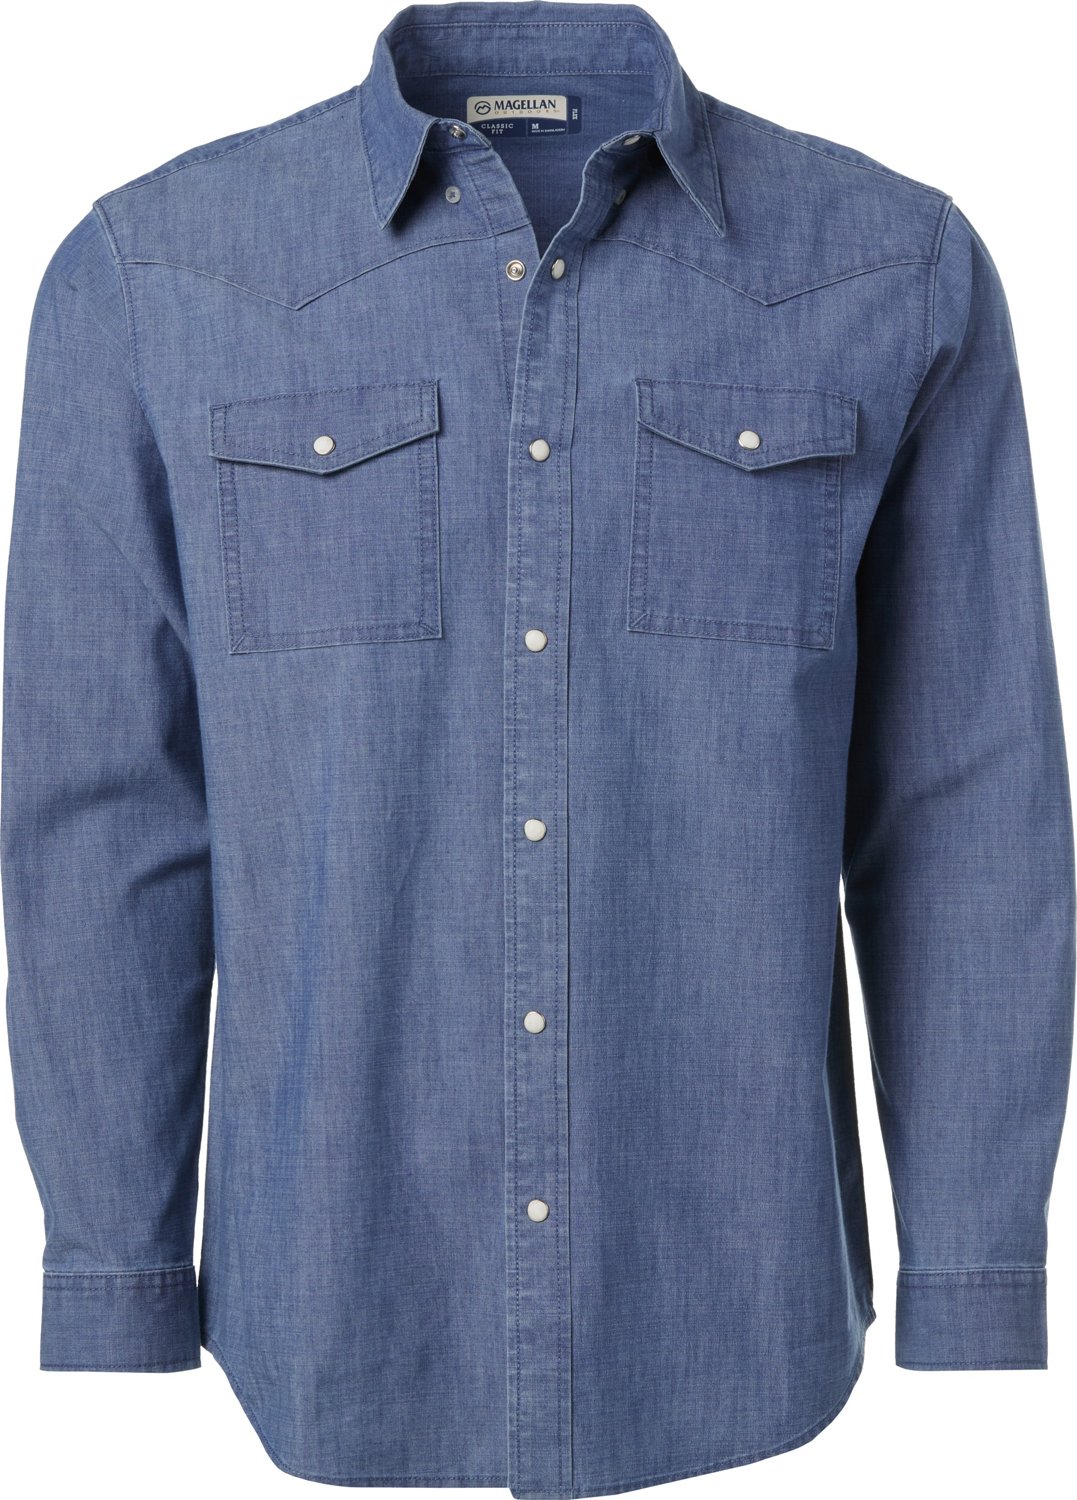 Magellan Cotton Long Sleeve Casual Button-Down Shirts for Men for